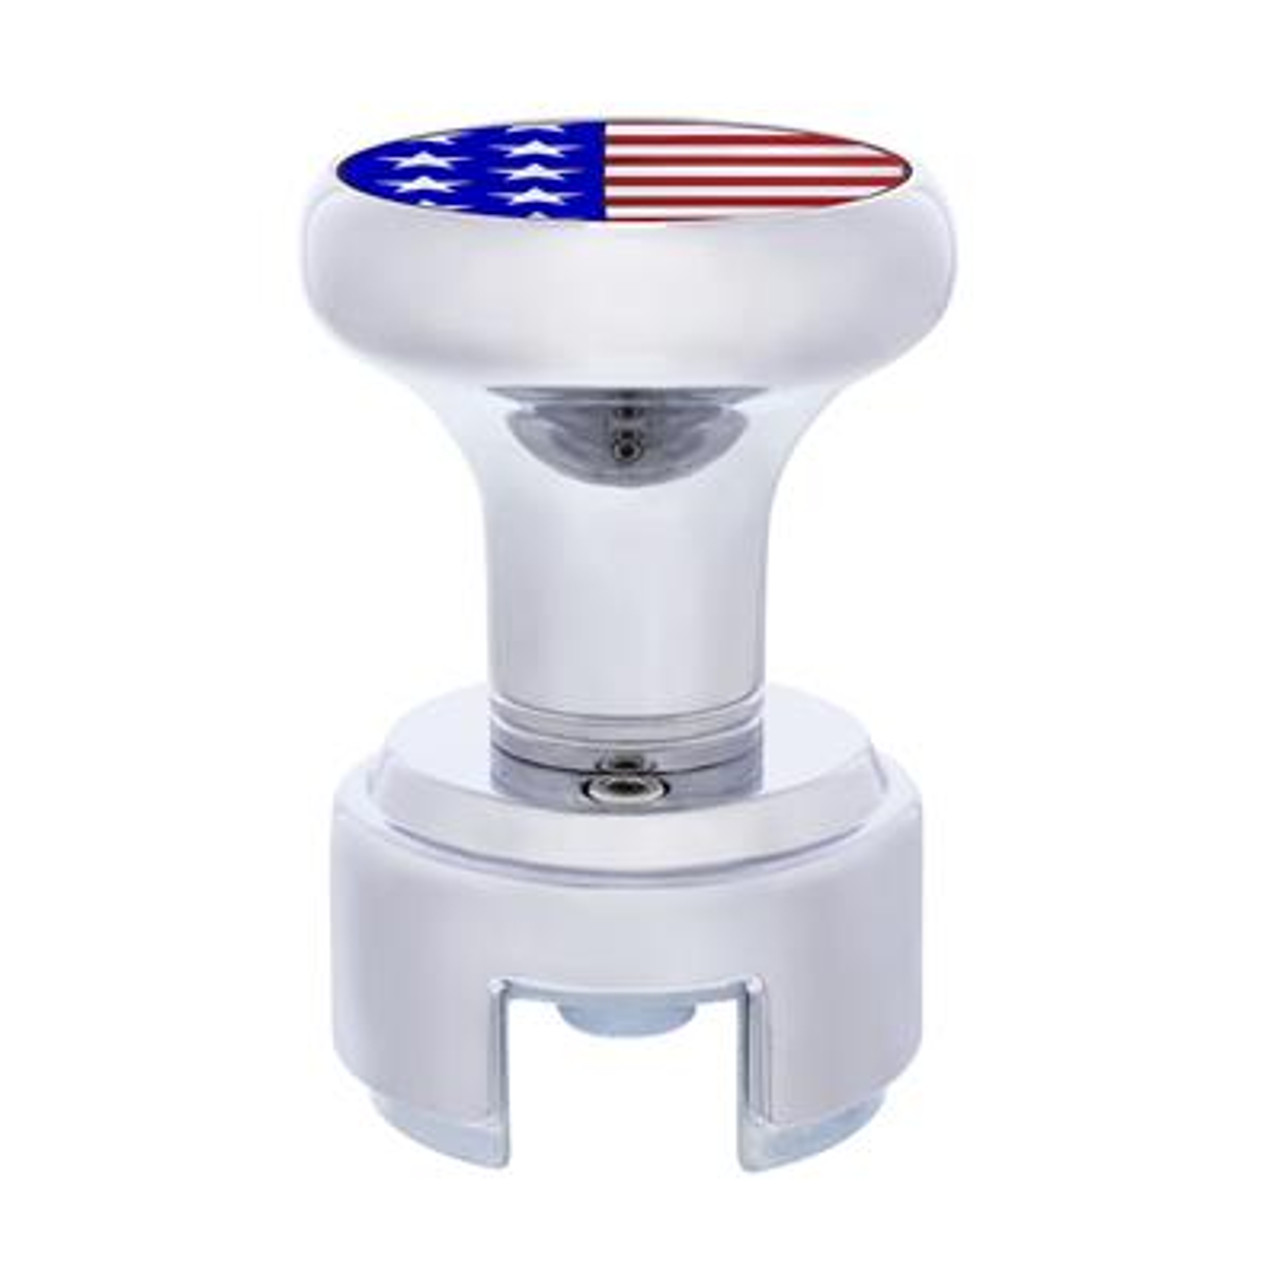 Chrome Thread-On Gearshift Knob With 13/15/18 Speed Adapter - US Flag